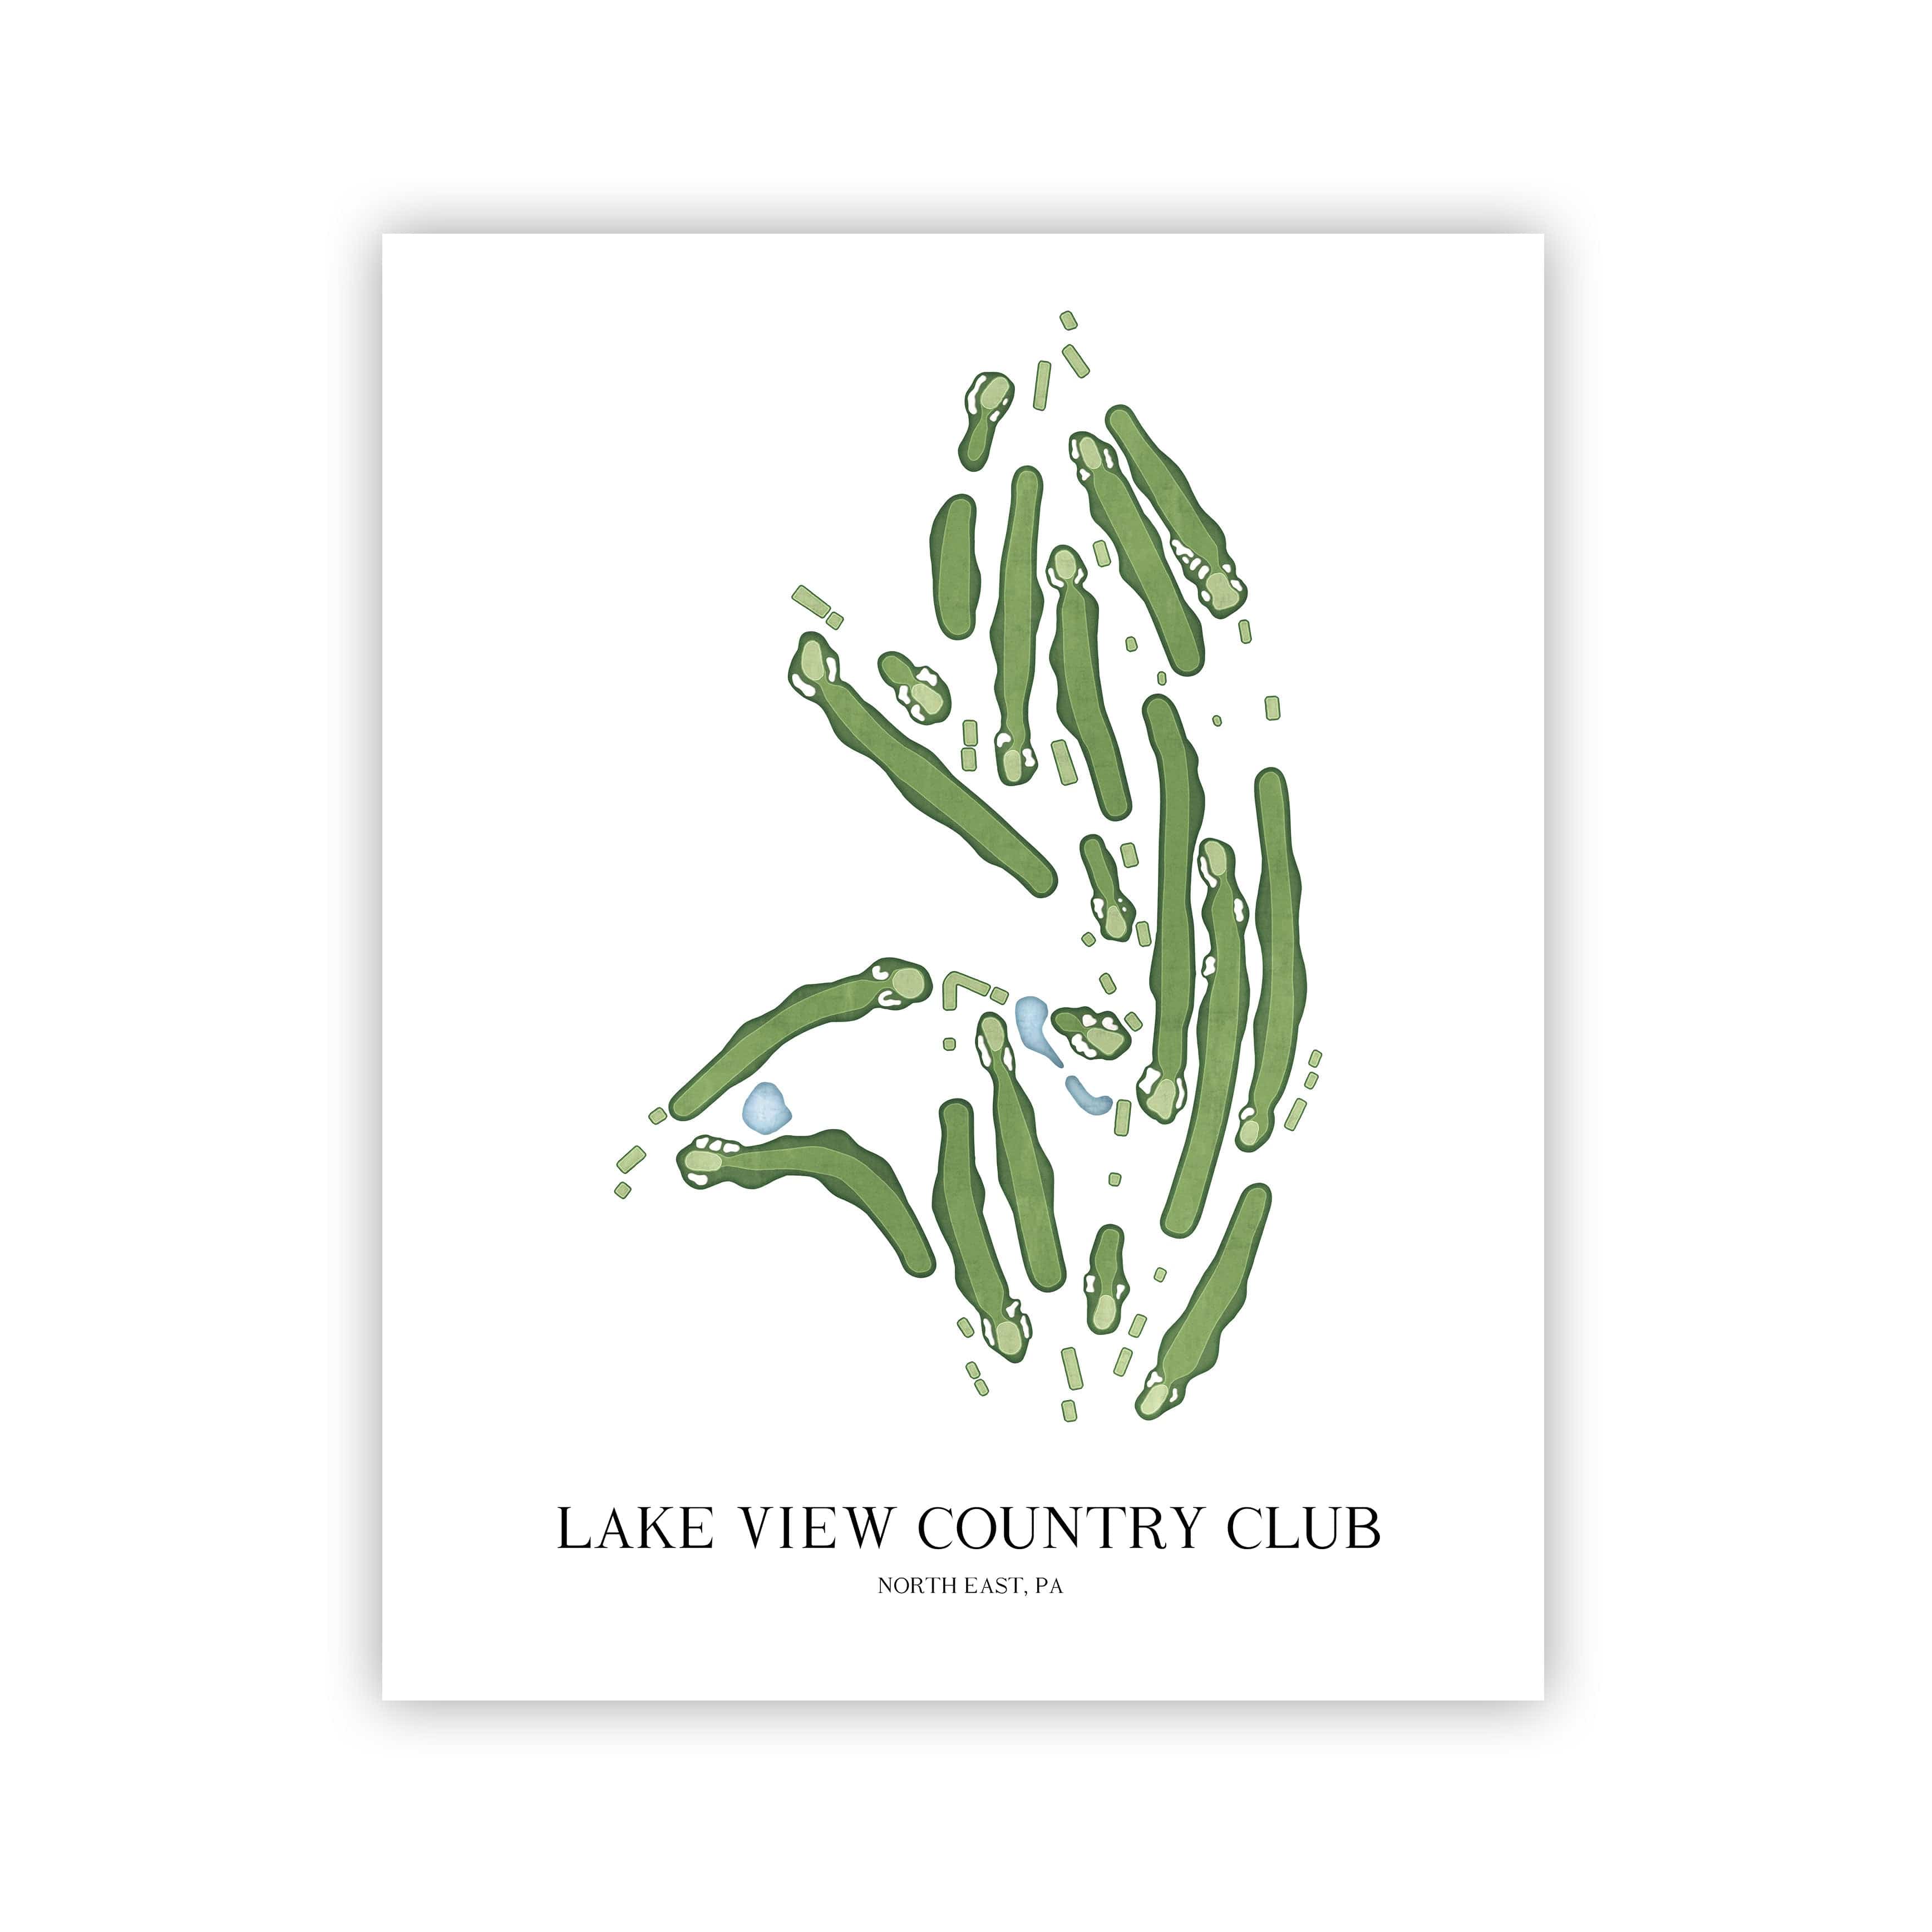 The 19th Hole Golf Shop - Golf Course Prints -  Lake View Country Club Golf Course Map